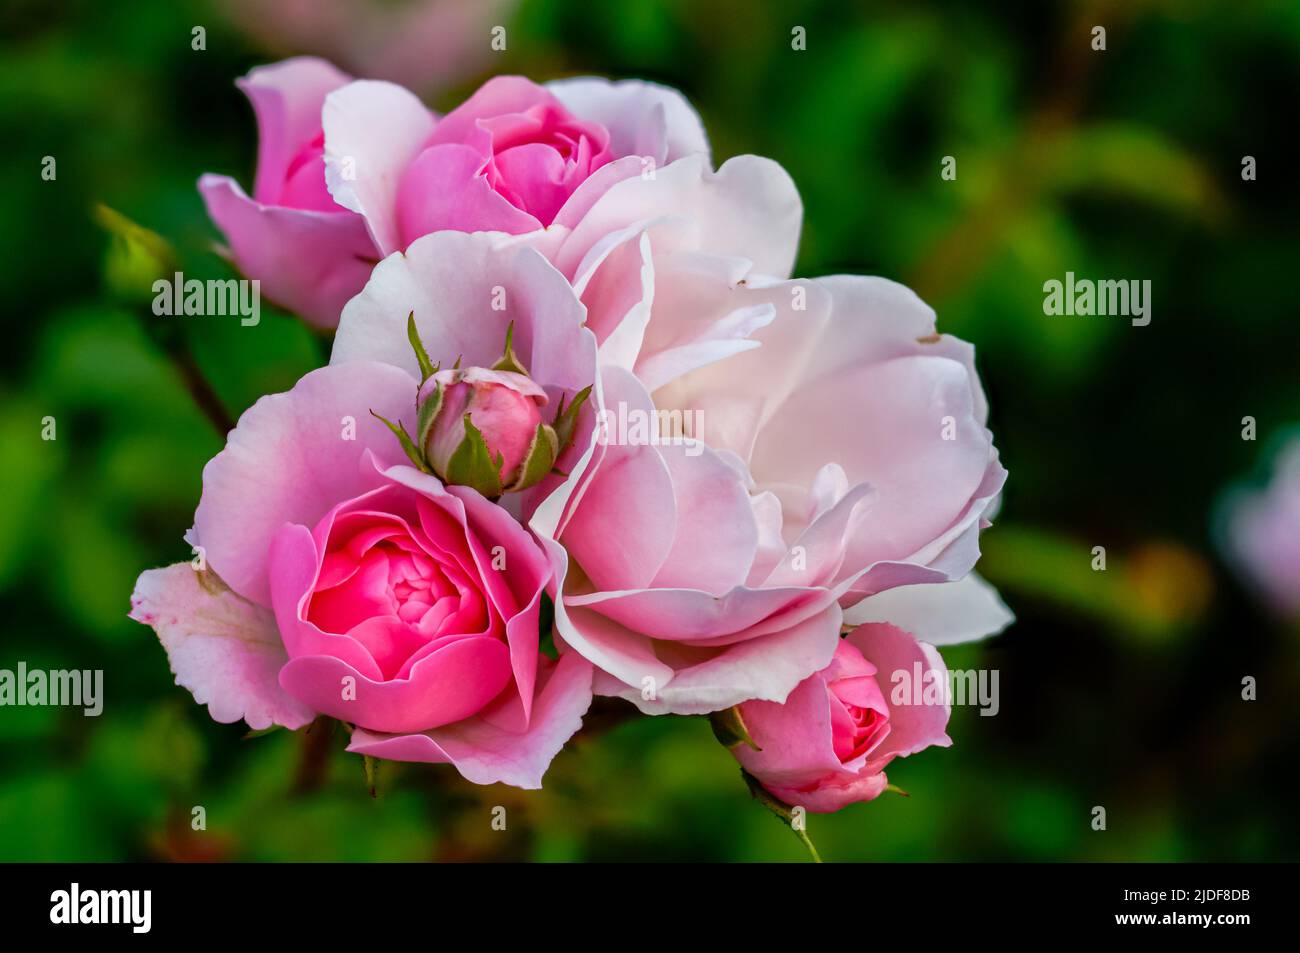 English rose, multi-flowered pink flower bouquets from close range Stock Photo